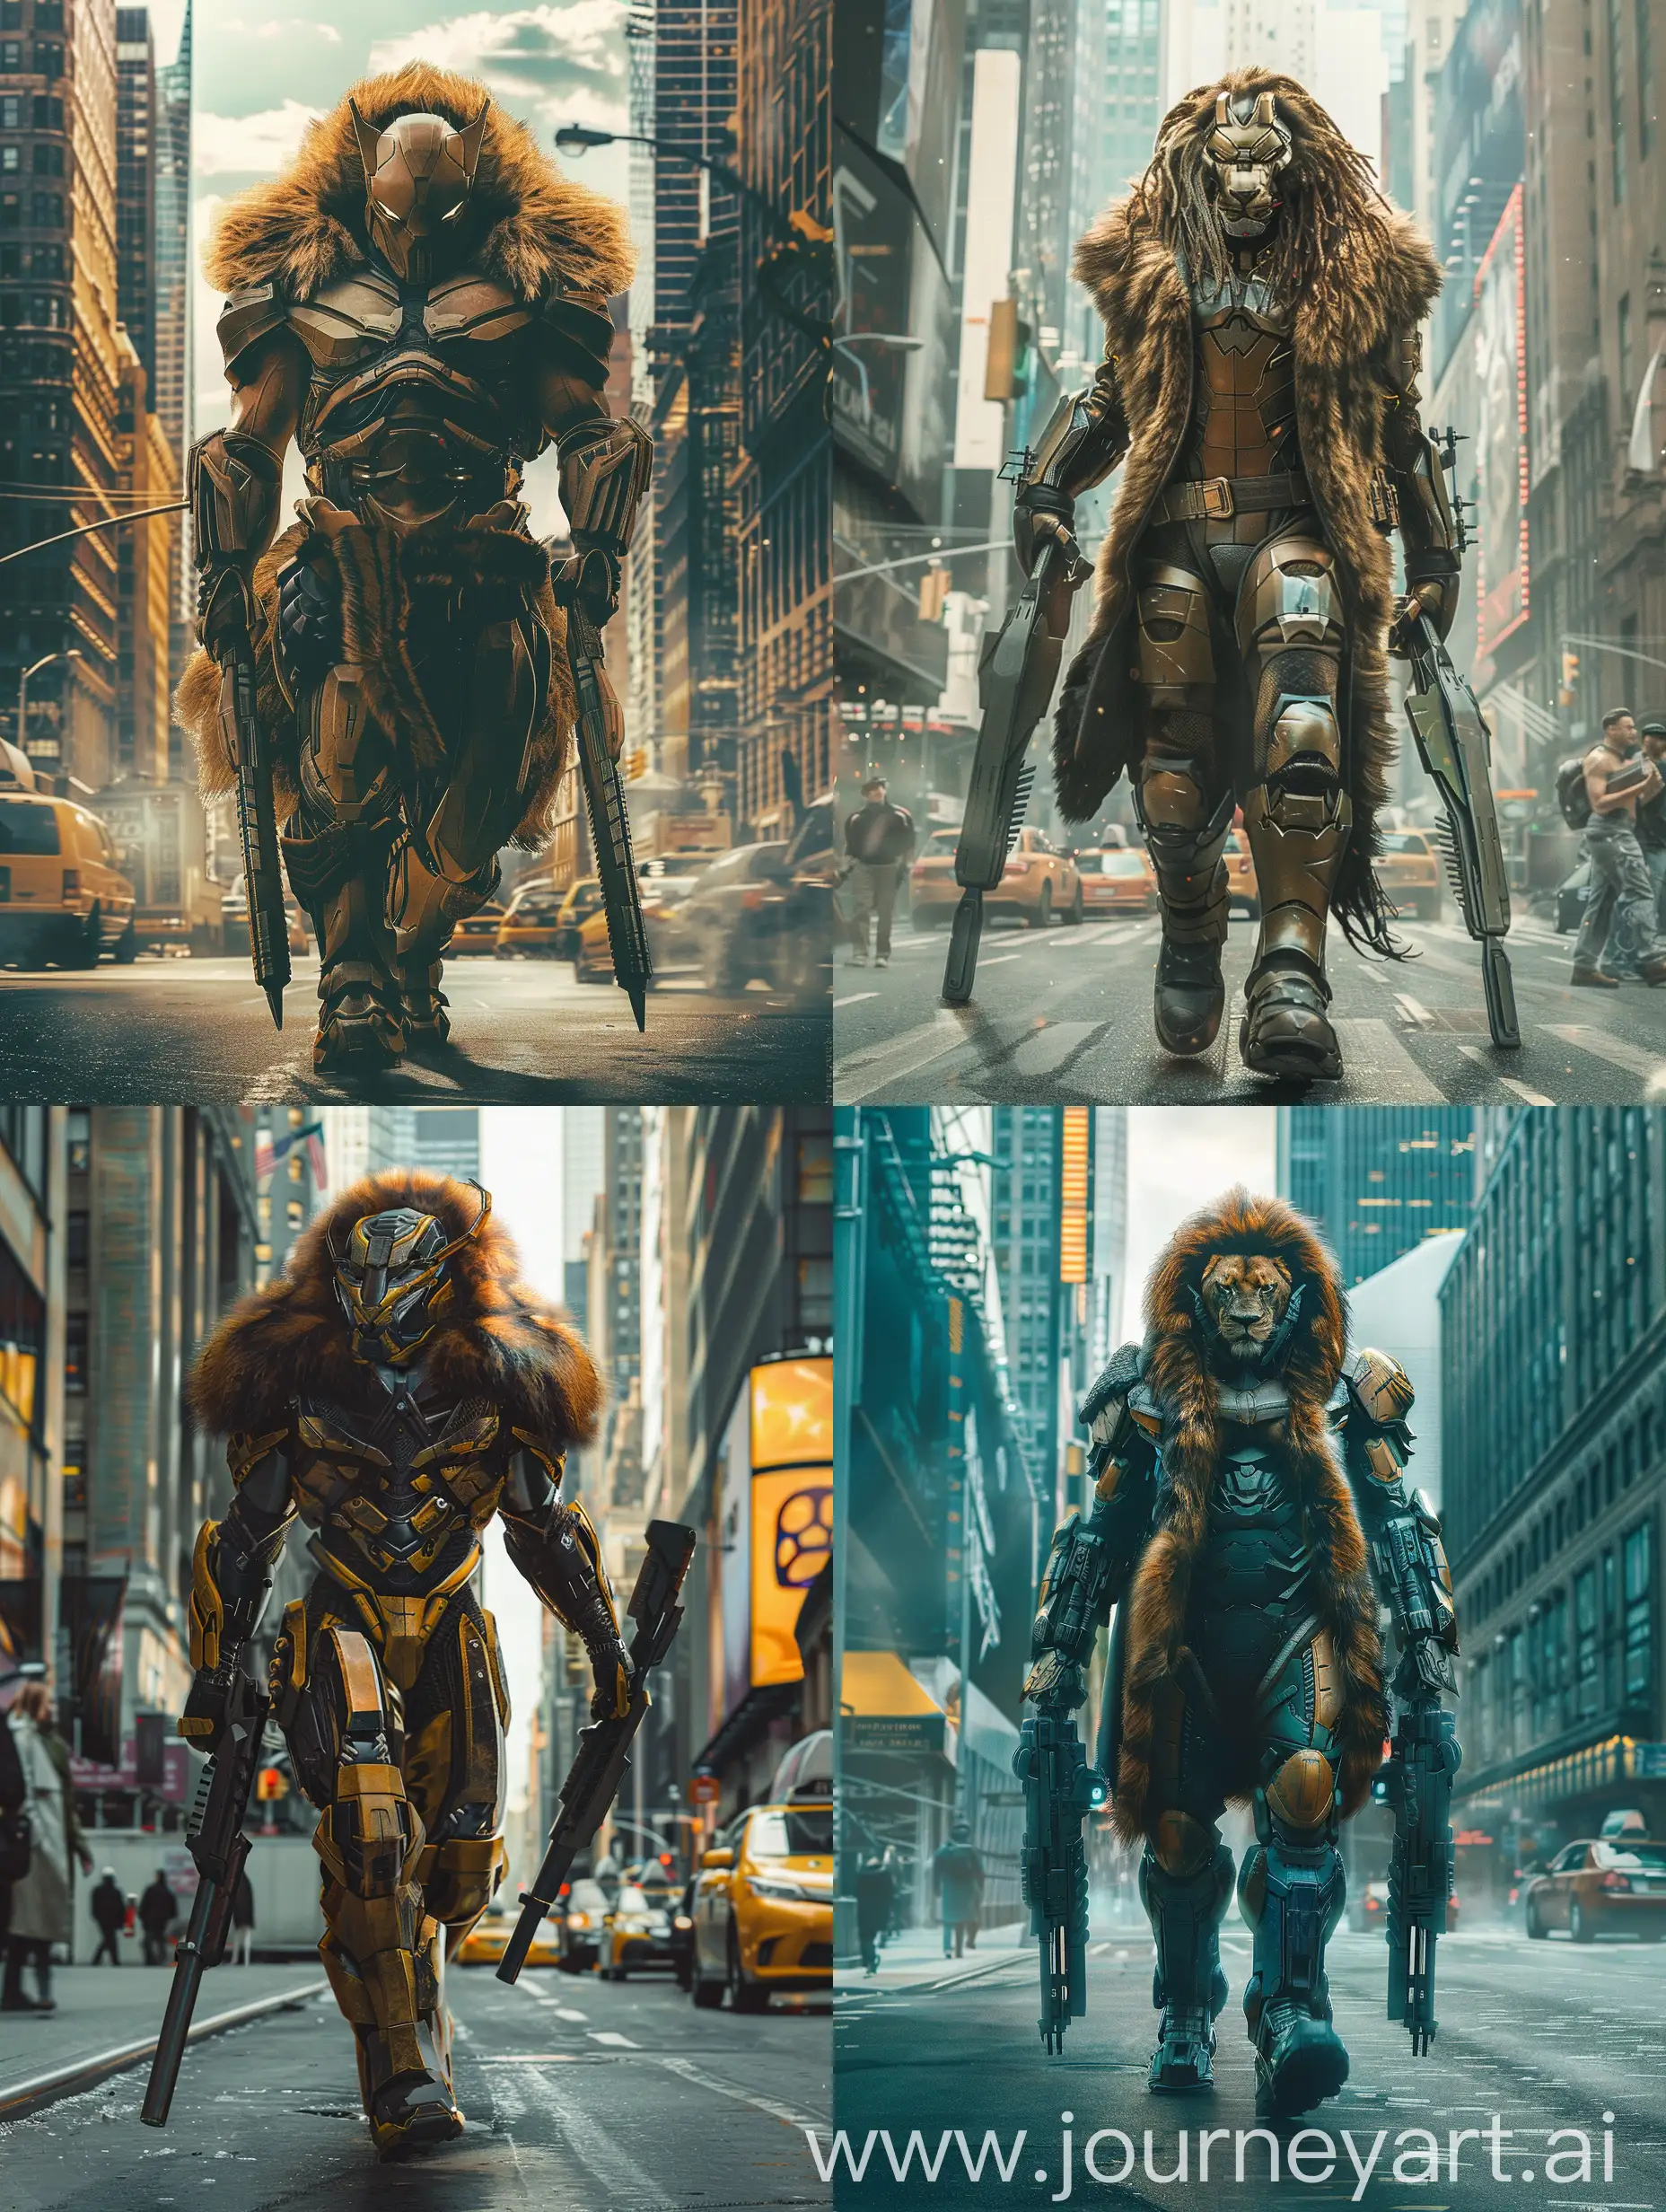 Futuristic-Marvel-Character-Kraven-the-Hunter-Strolls-New-York-Streets-Armed-with-Classic-Lion-Fur-Coat